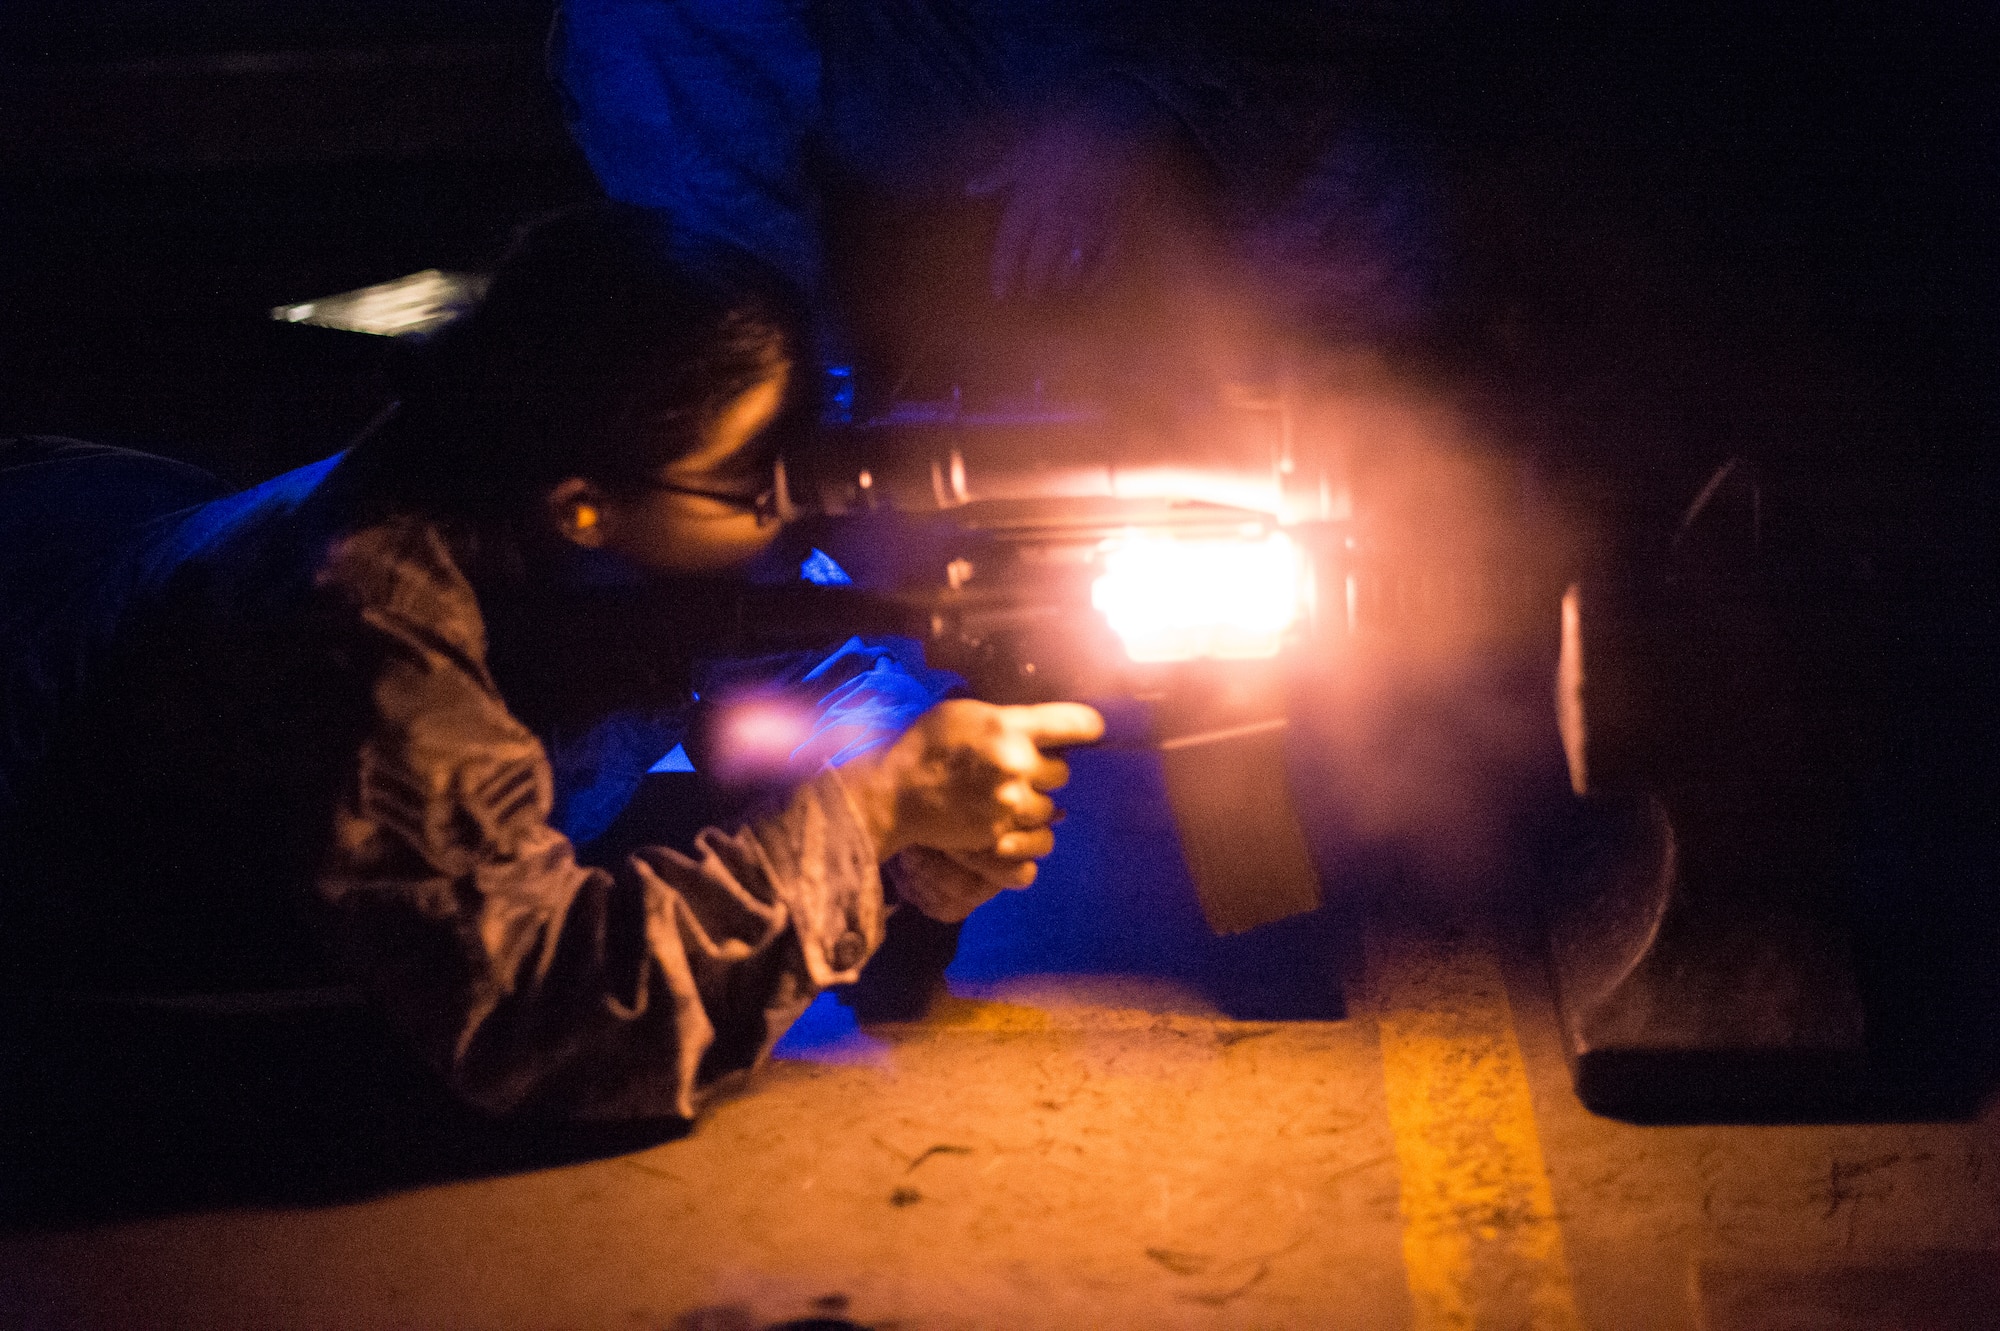 U.S. Air Force Airman 1st Class Paula Helms, a member of the 116th Security Forces Squadron (SFS), Georgia Air National Guard, fires an M4 carbine rifle during a night time training exercise at the Catoosa Training Site, Tunnel Hill, Ga., June 25, 2014. The 116th SFS is the security arm of the 116th Air Control Wing based at Robins Air Force Base, Ga. The squadron deployed to the Catoosa Training Site for annual training where they received extensive classroom and hands-on training to hone their skills on various firearms such as the M4 carbine, M203 grenade launcher and M240 and M249 machine guns. (U.S. Air National Guard photo by Master Sgt. Roger Parsons/Released)